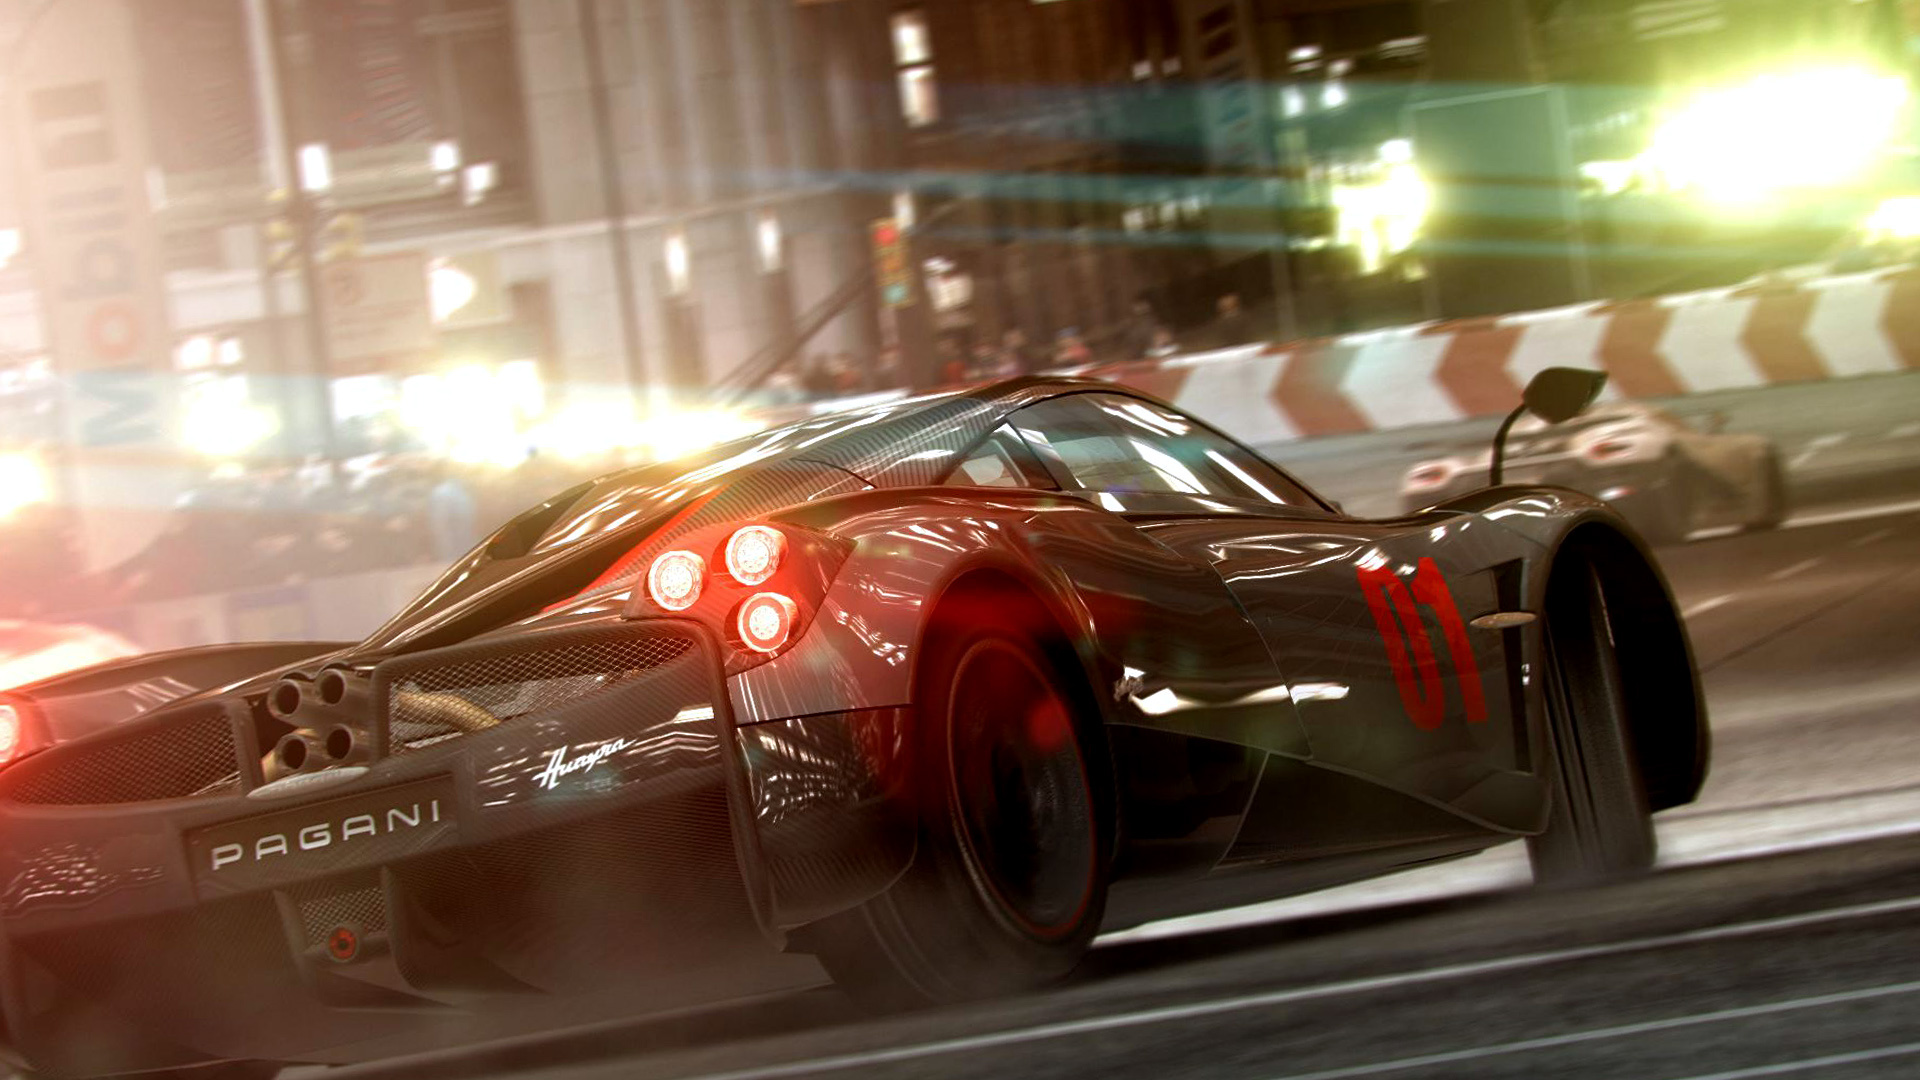 Gaming cars, Thrilling wallpapers, Speed and adventure, Captivating visuals, 1920x1080 Full HD Desktop